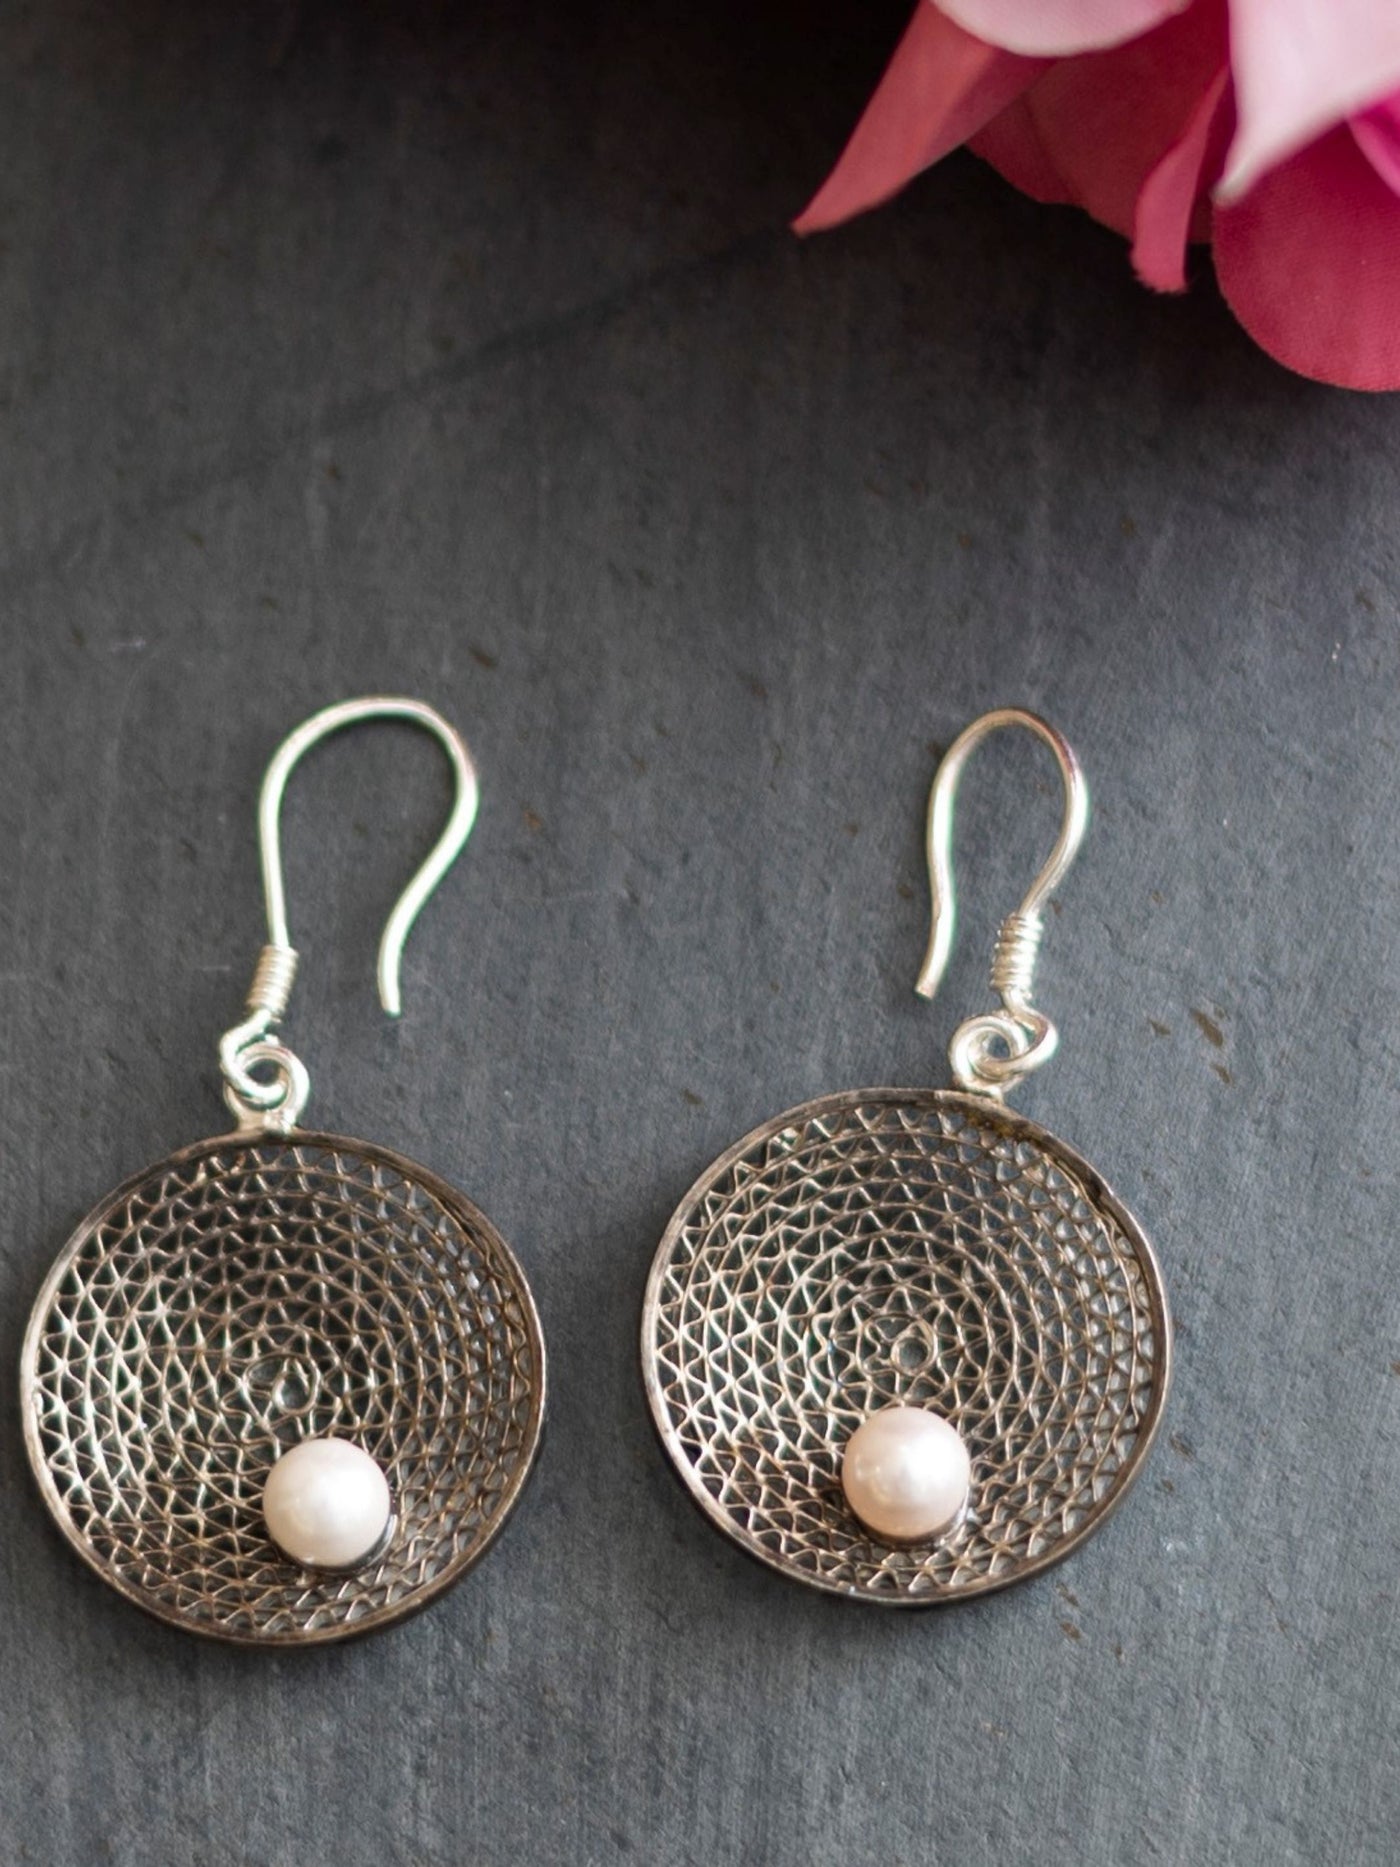 Filigree Silver Earrings With Pearls  - View 1